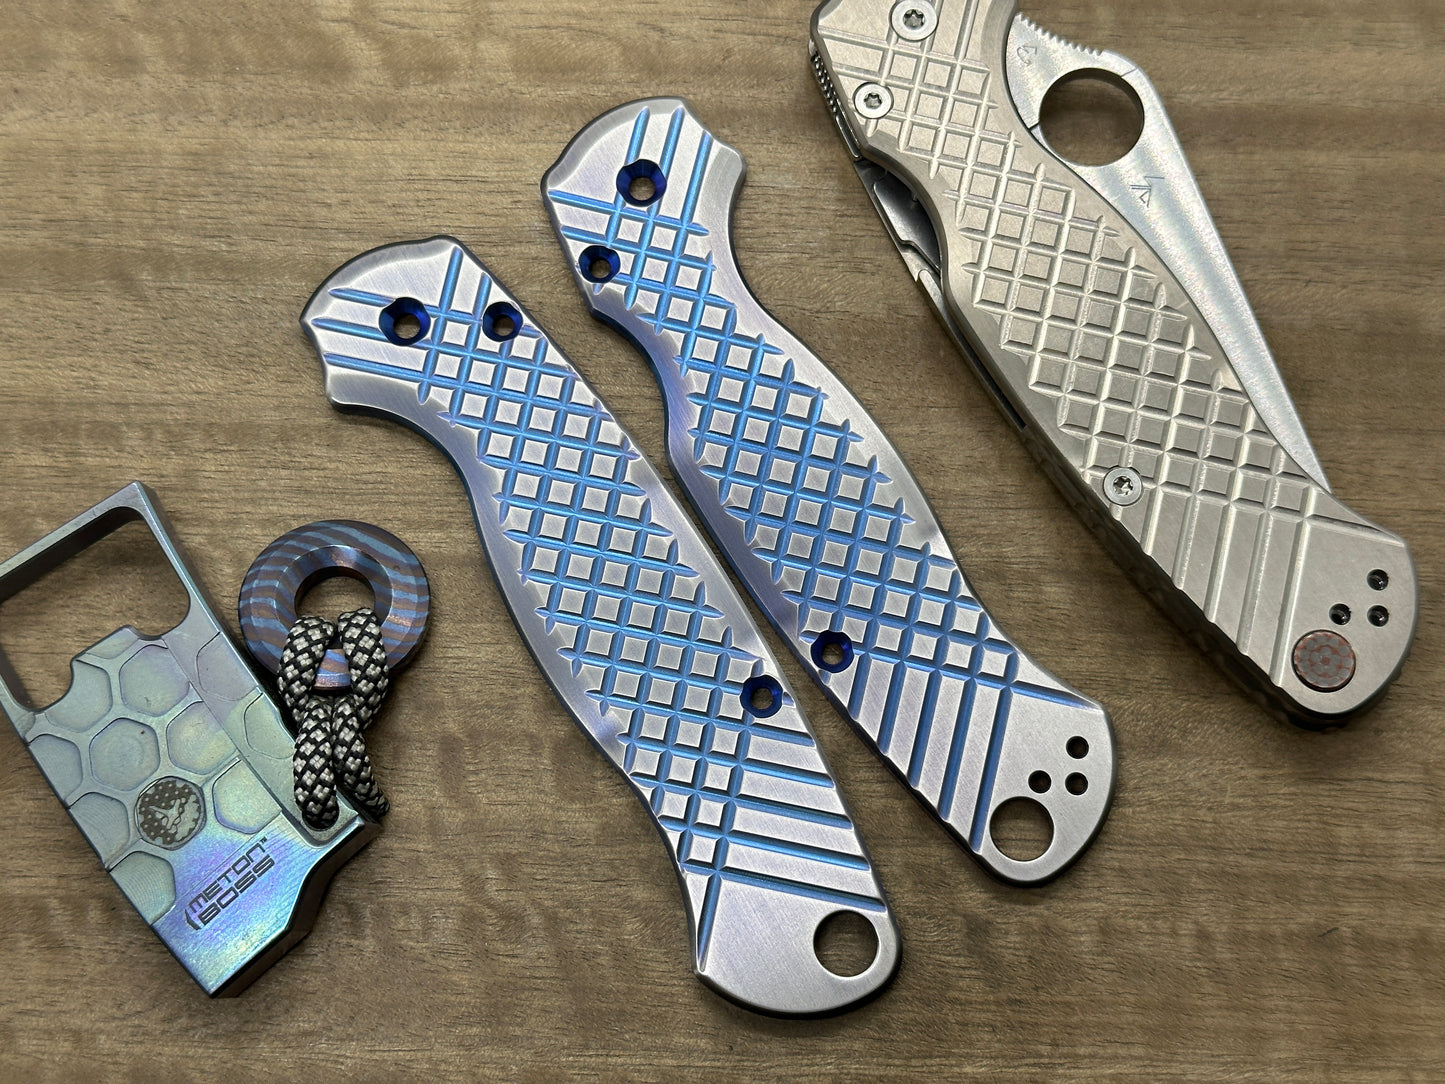 2-Tone BLUE ano & Brushed FRAG Titanium scales for Spyderco Paramilitary 2 PM2